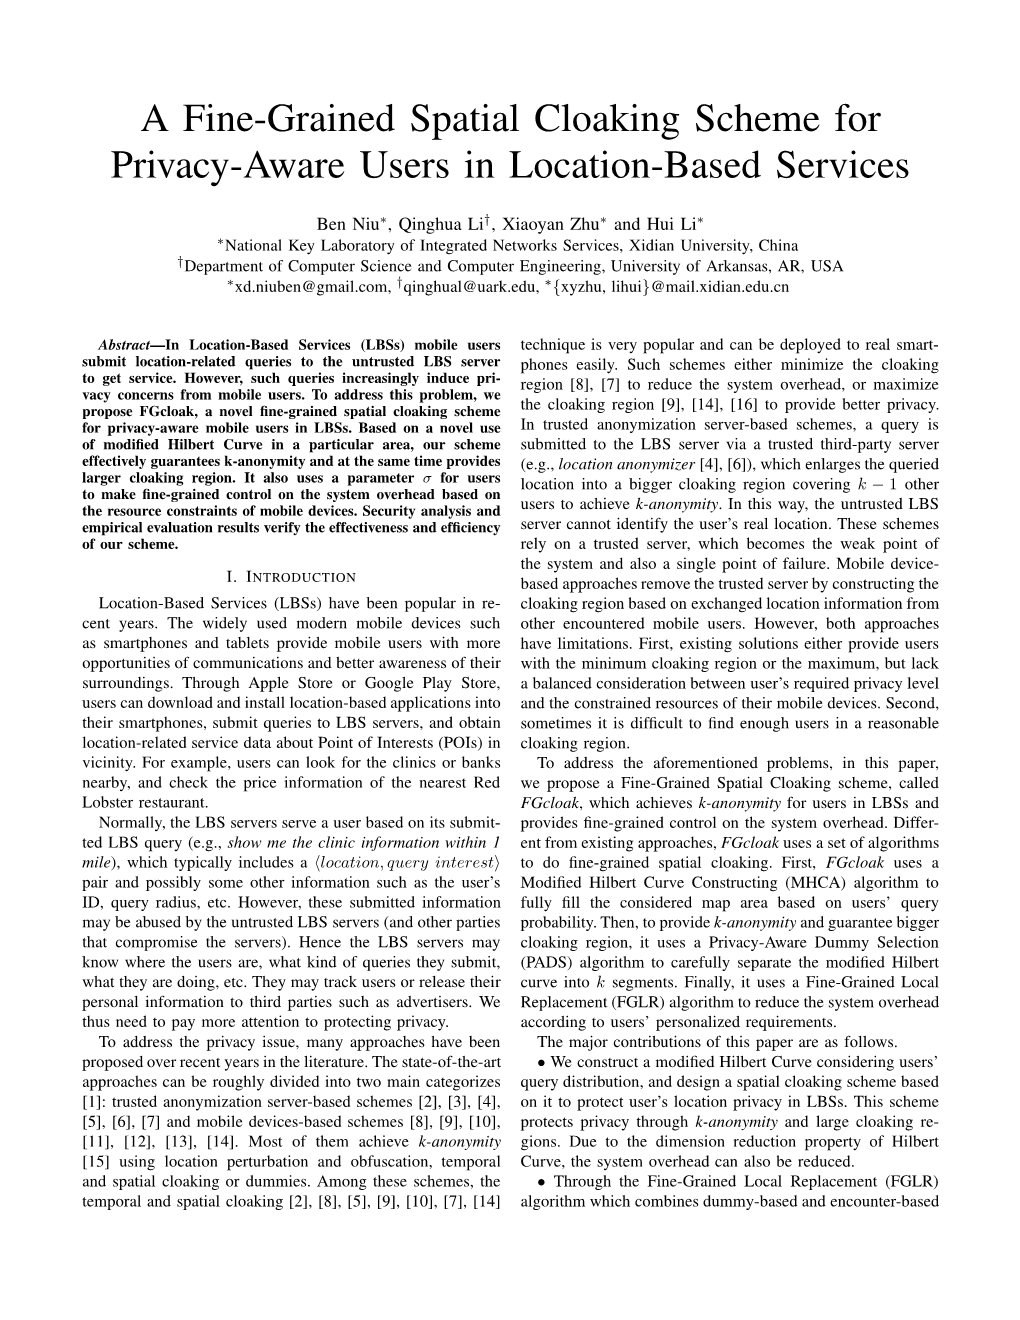 A Fine-Grained Spatial Cloaking Scheme for Privacy-Aware Users in Location-Based Services